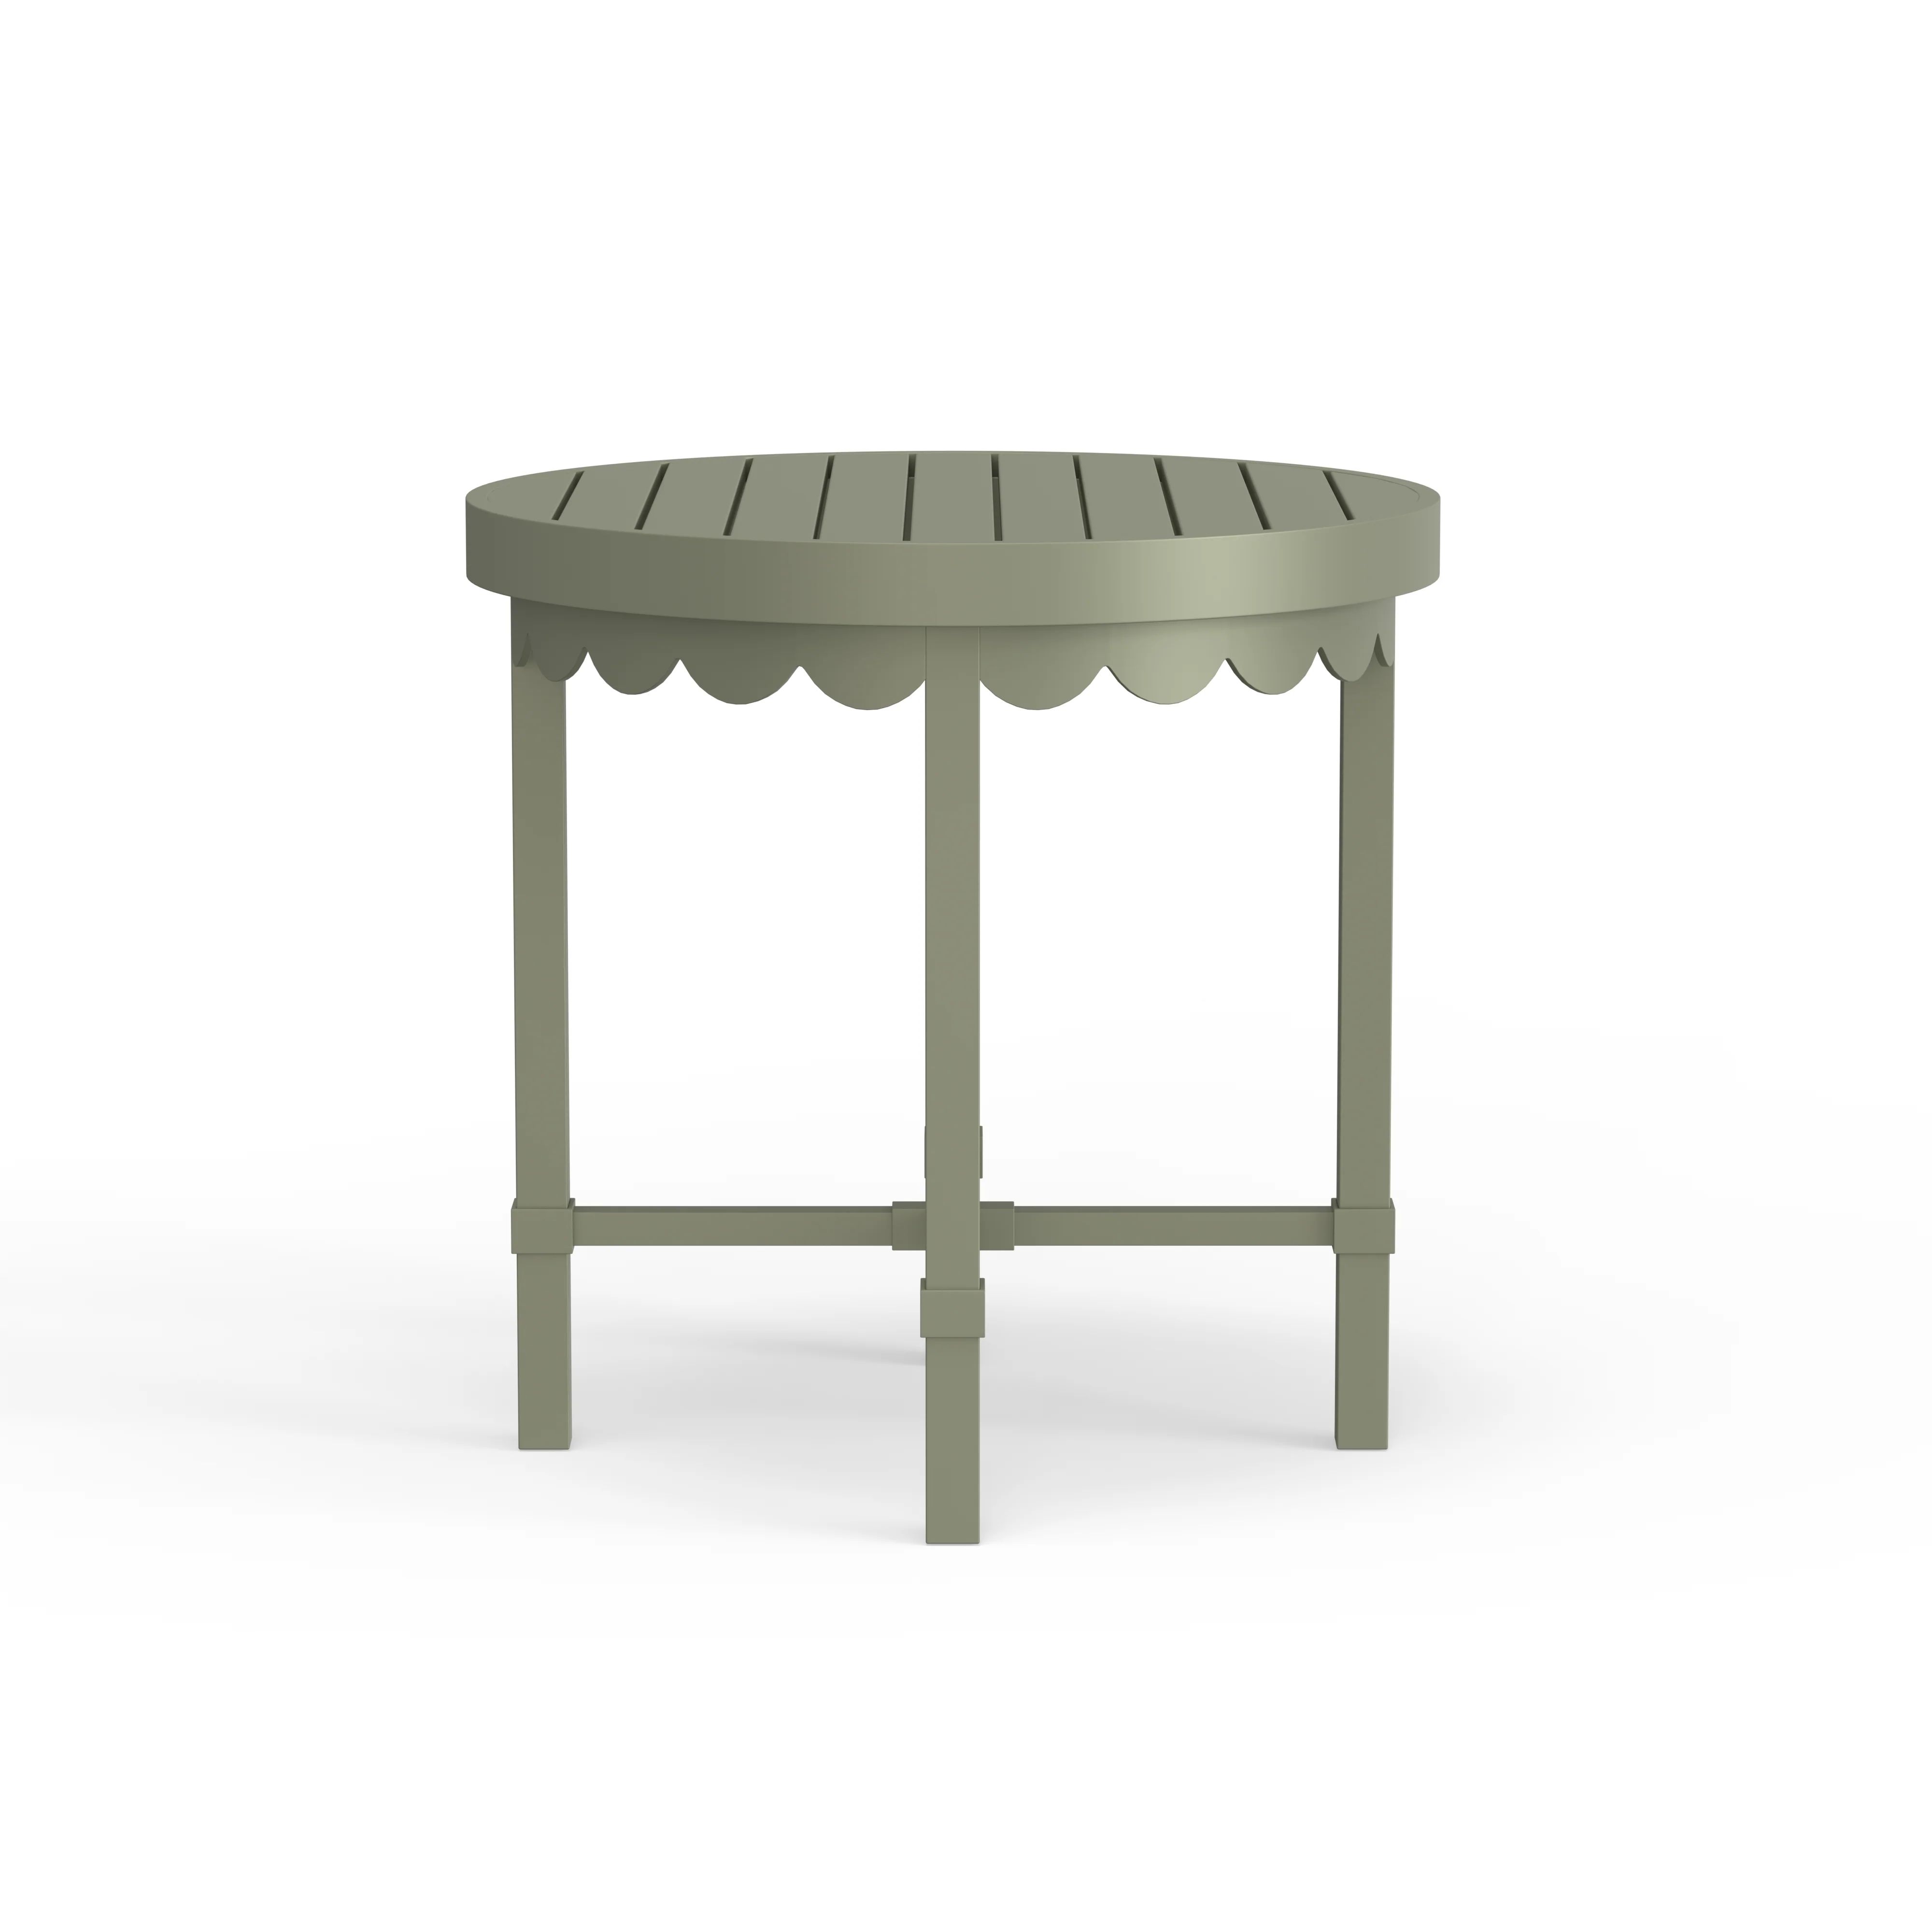 Early Access: Riviera Side Table in Sage | Brooke and Lou